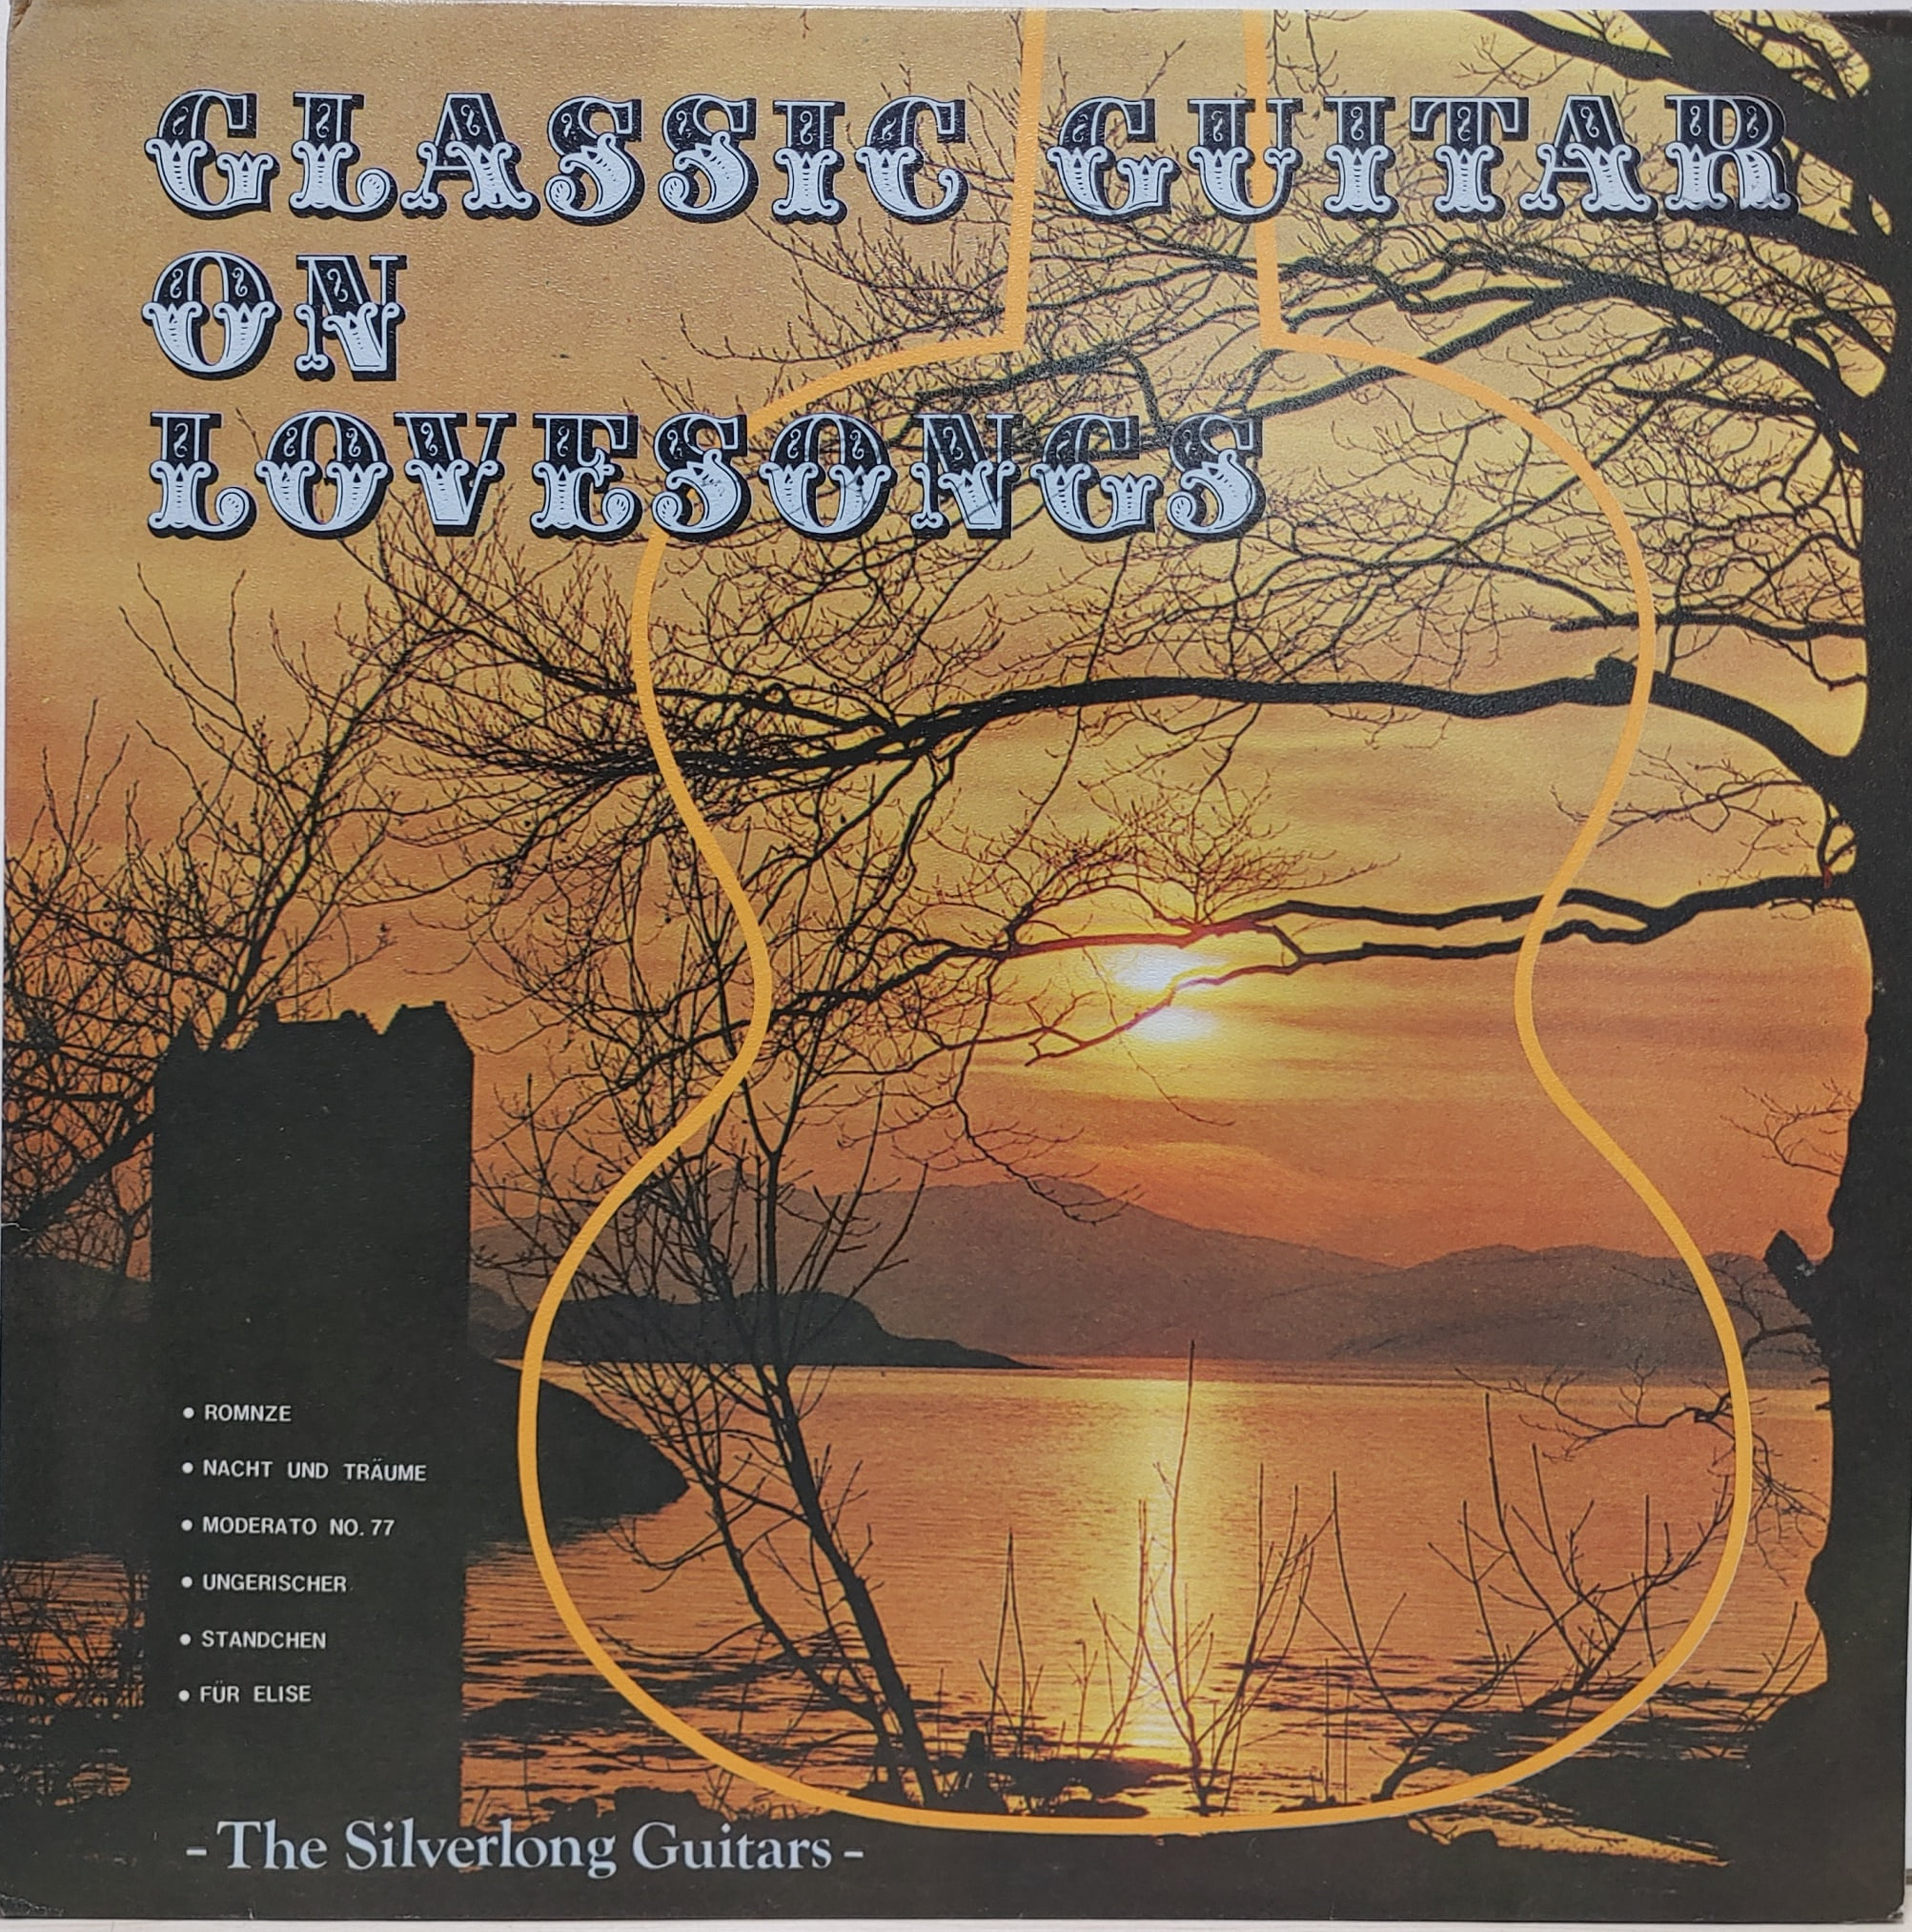 CLASSIC GUITAR ON LOVESONGS / THE SILVERLONG GUITARS